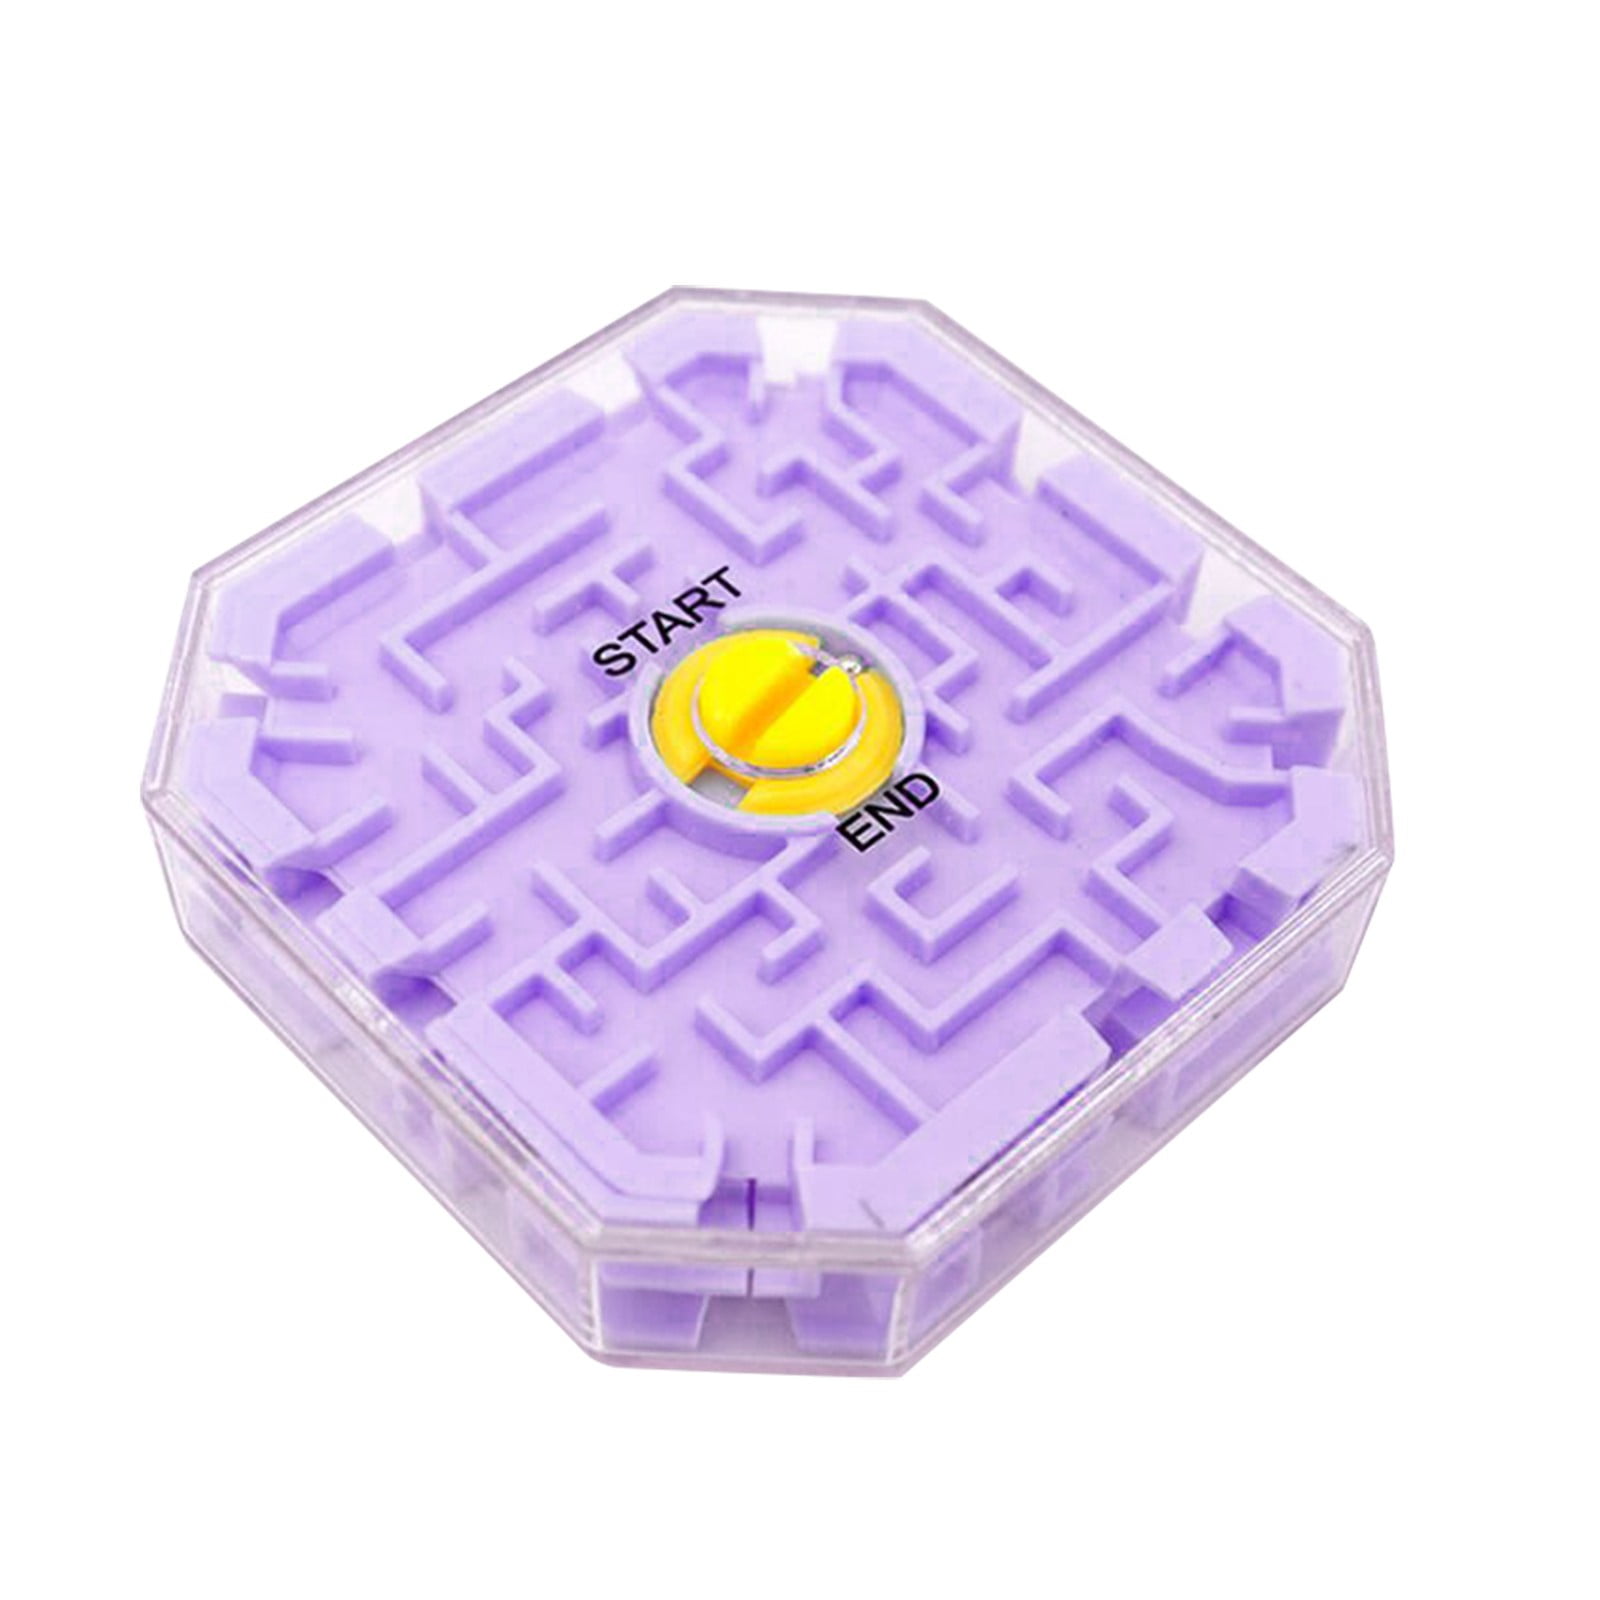 3D Gravity Amaze Memory Sequential Maze Ball Puzzle Toy Gifts for Kids Adults 